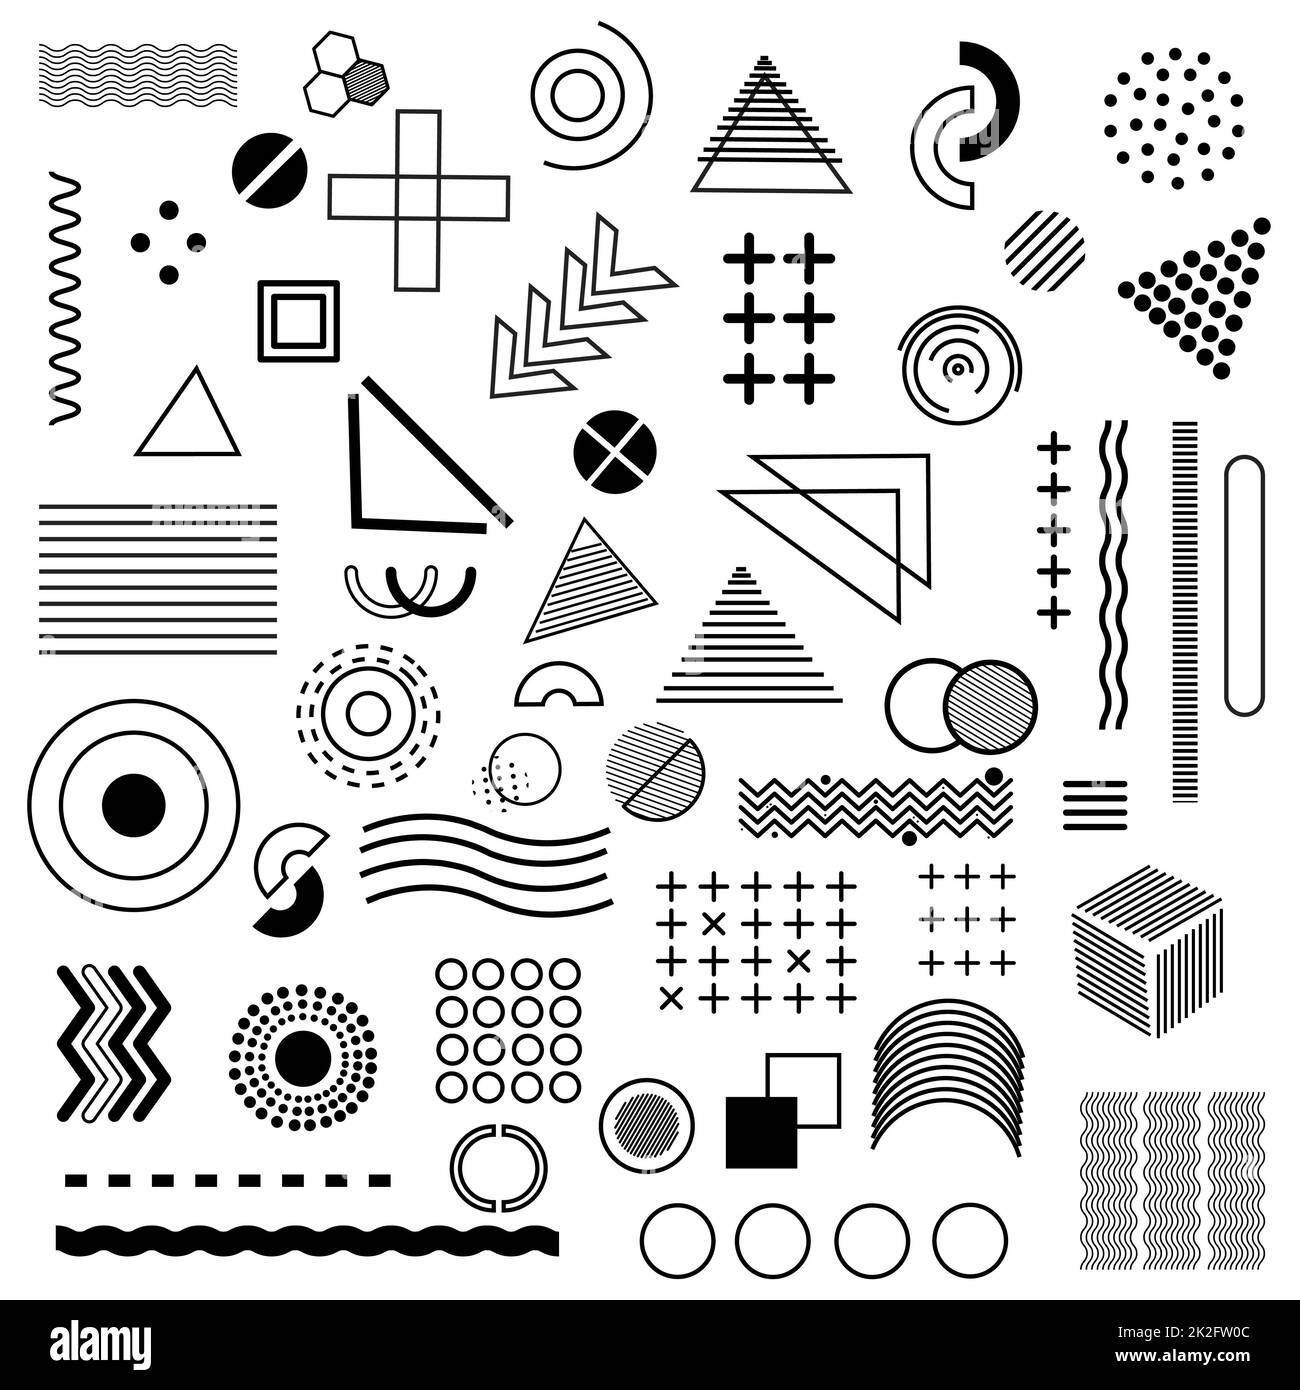 Big set of different abstract elements - Vector Stock Photo